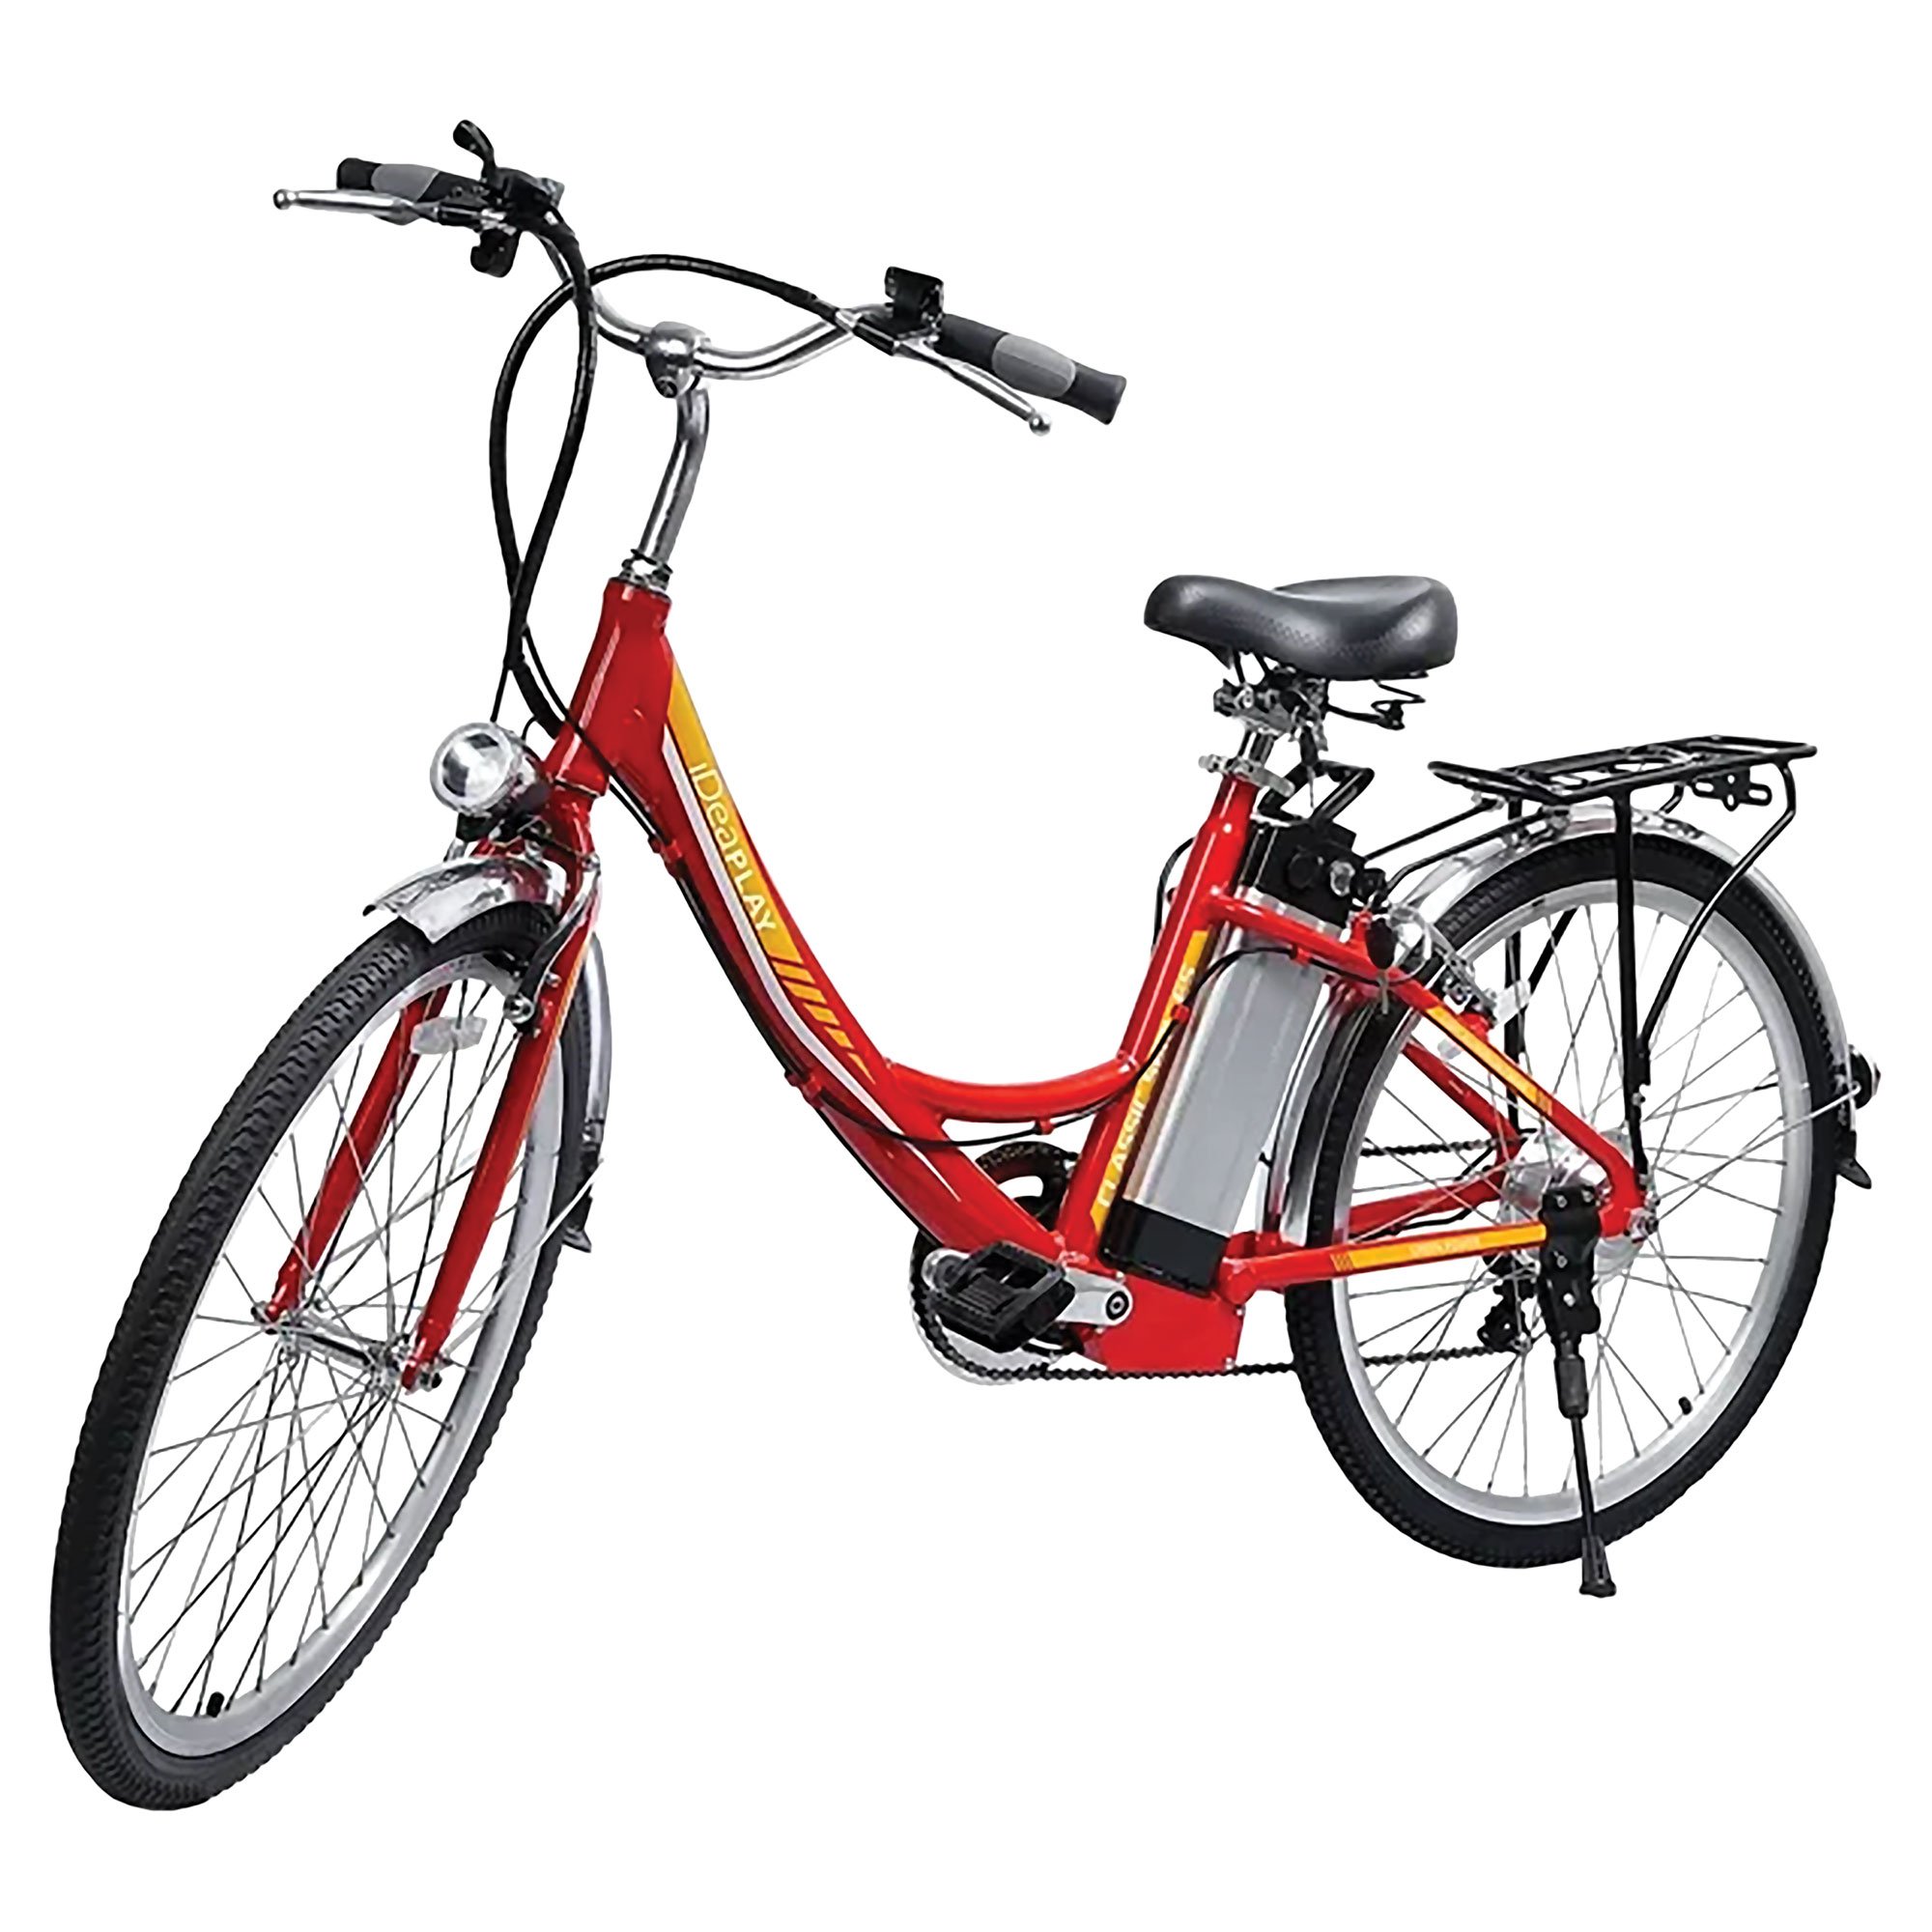 iDeaPlay 24" 250W Electric Bike - Red